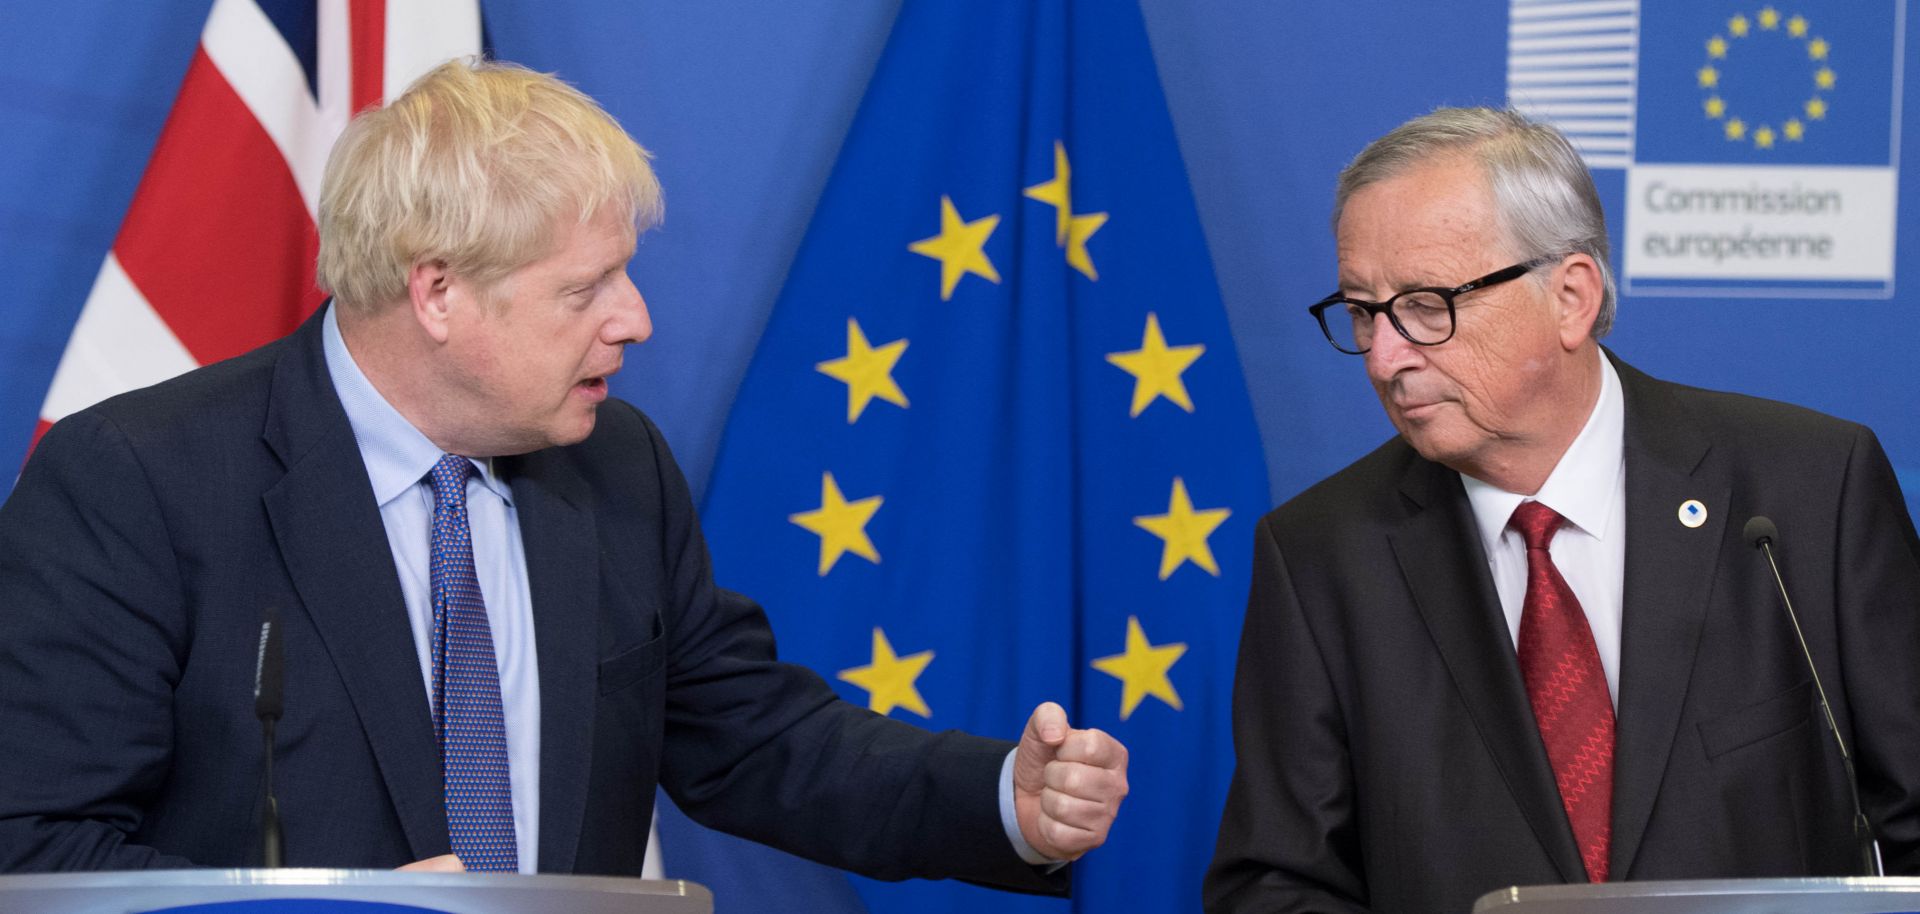 British Prime Minister Boris Johnson (L) and European Commission President Jean-Claude Juncker converse ahead of the European Council summit in Brussels on Oct. 17, 2019. 